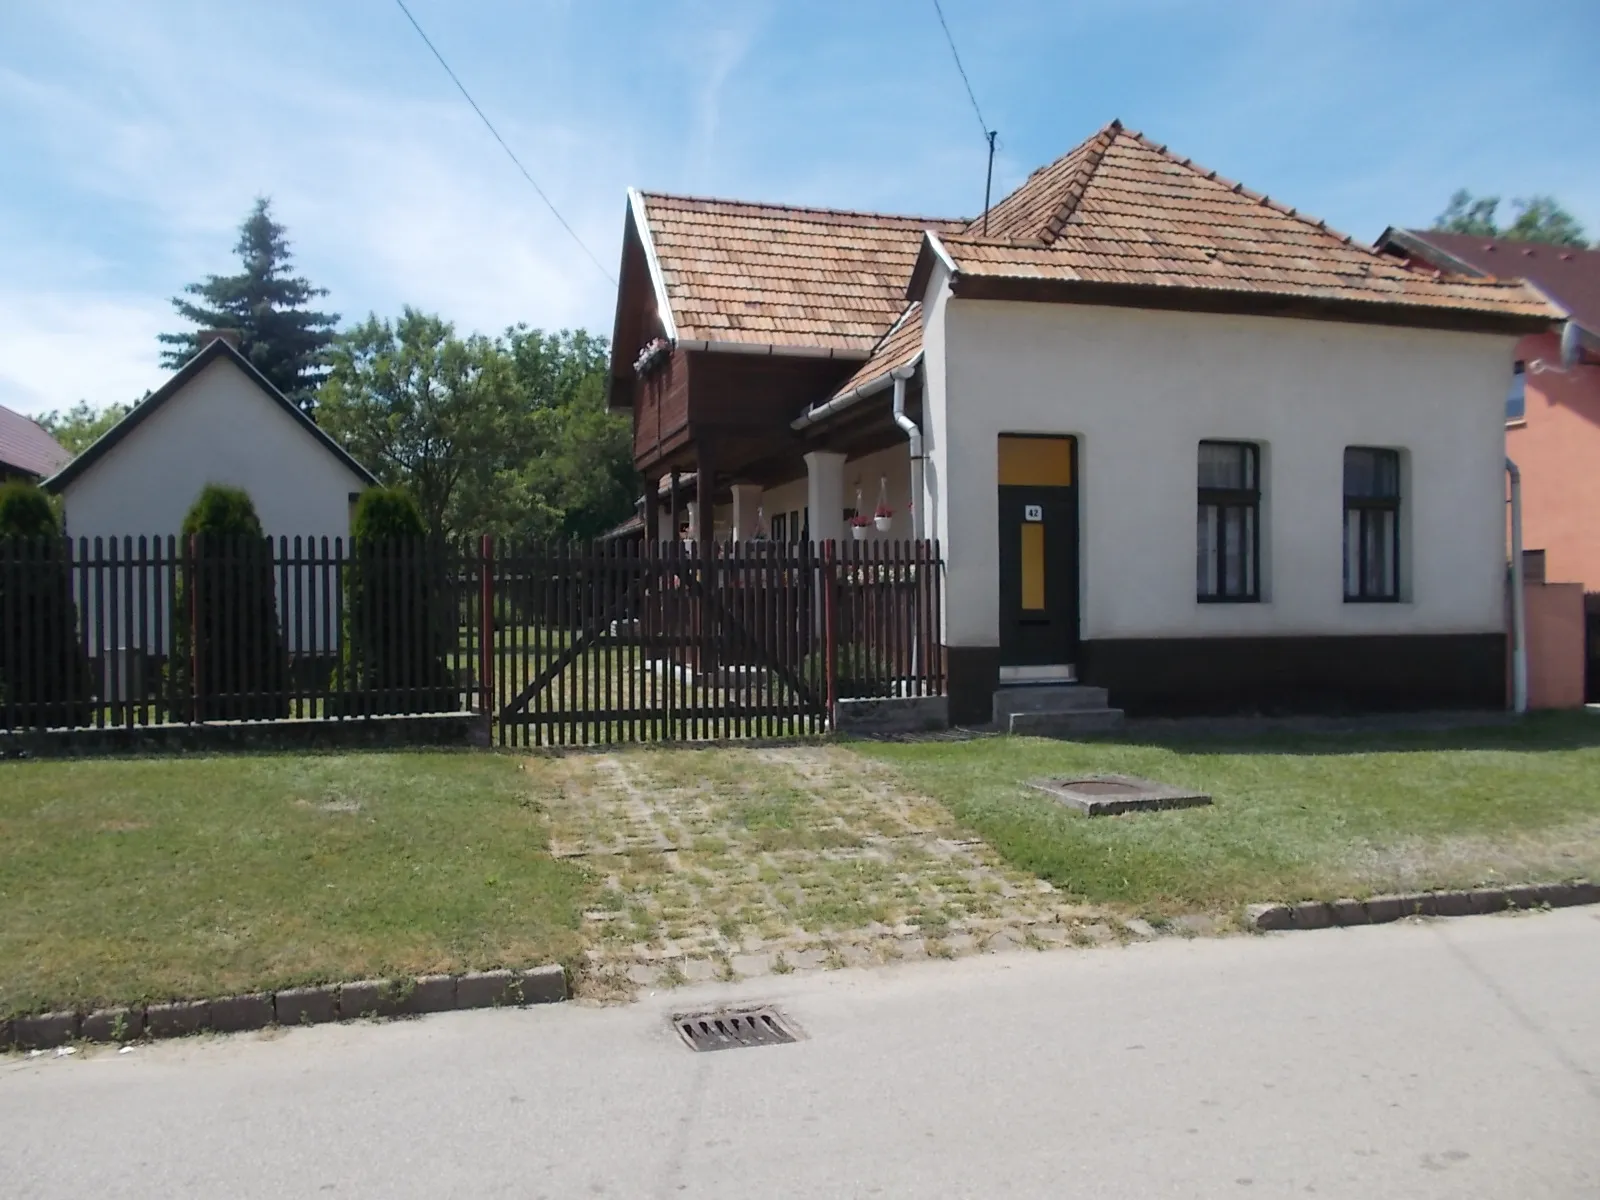 Photo showing: : Porched house with wooden structure. - 42 Táncsics Street, Telep neighborhood, Bicske, Fejér County, Hungary.